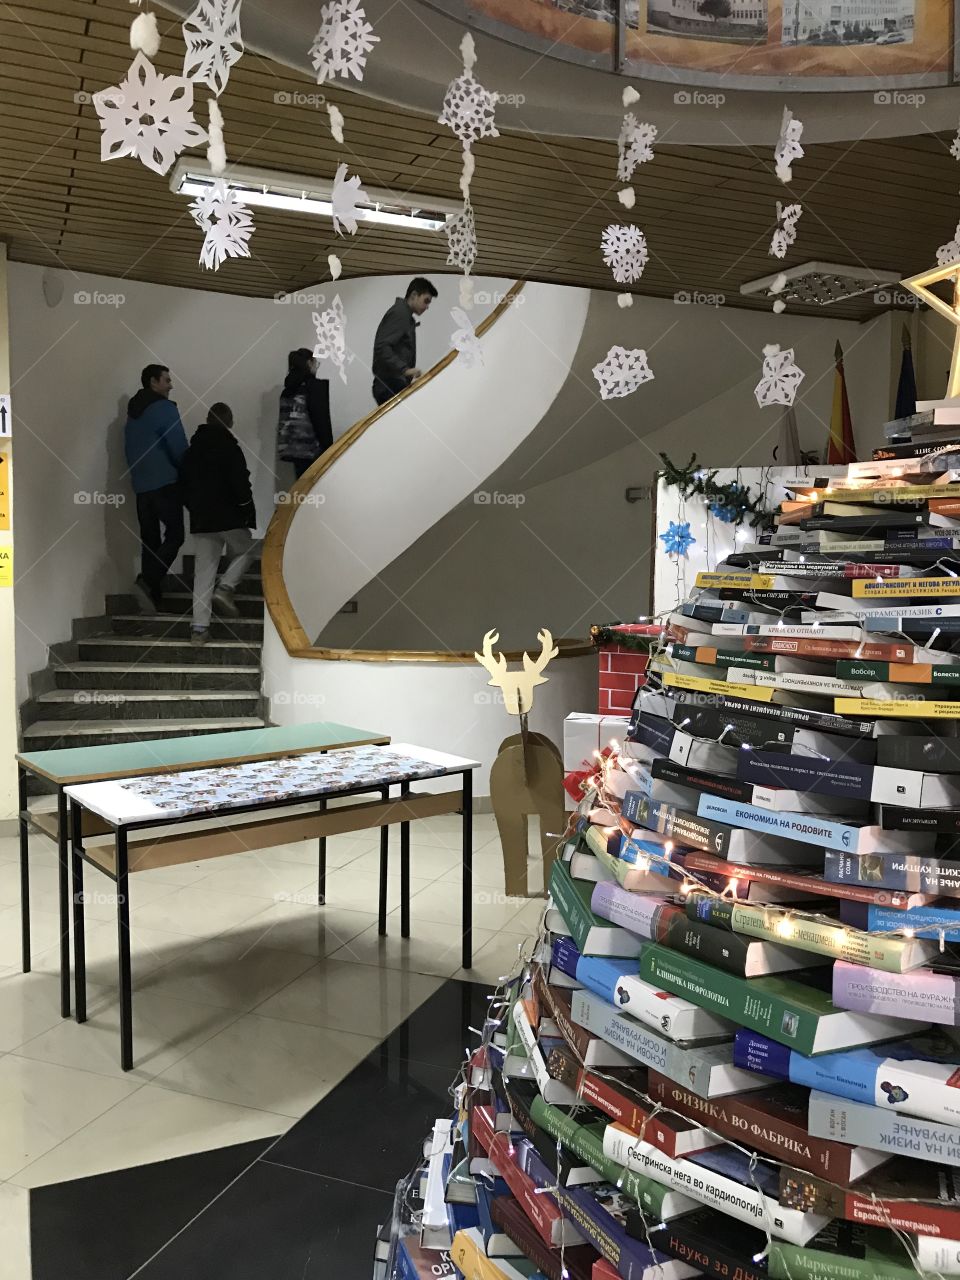 Crafting a Christmas tree out of books